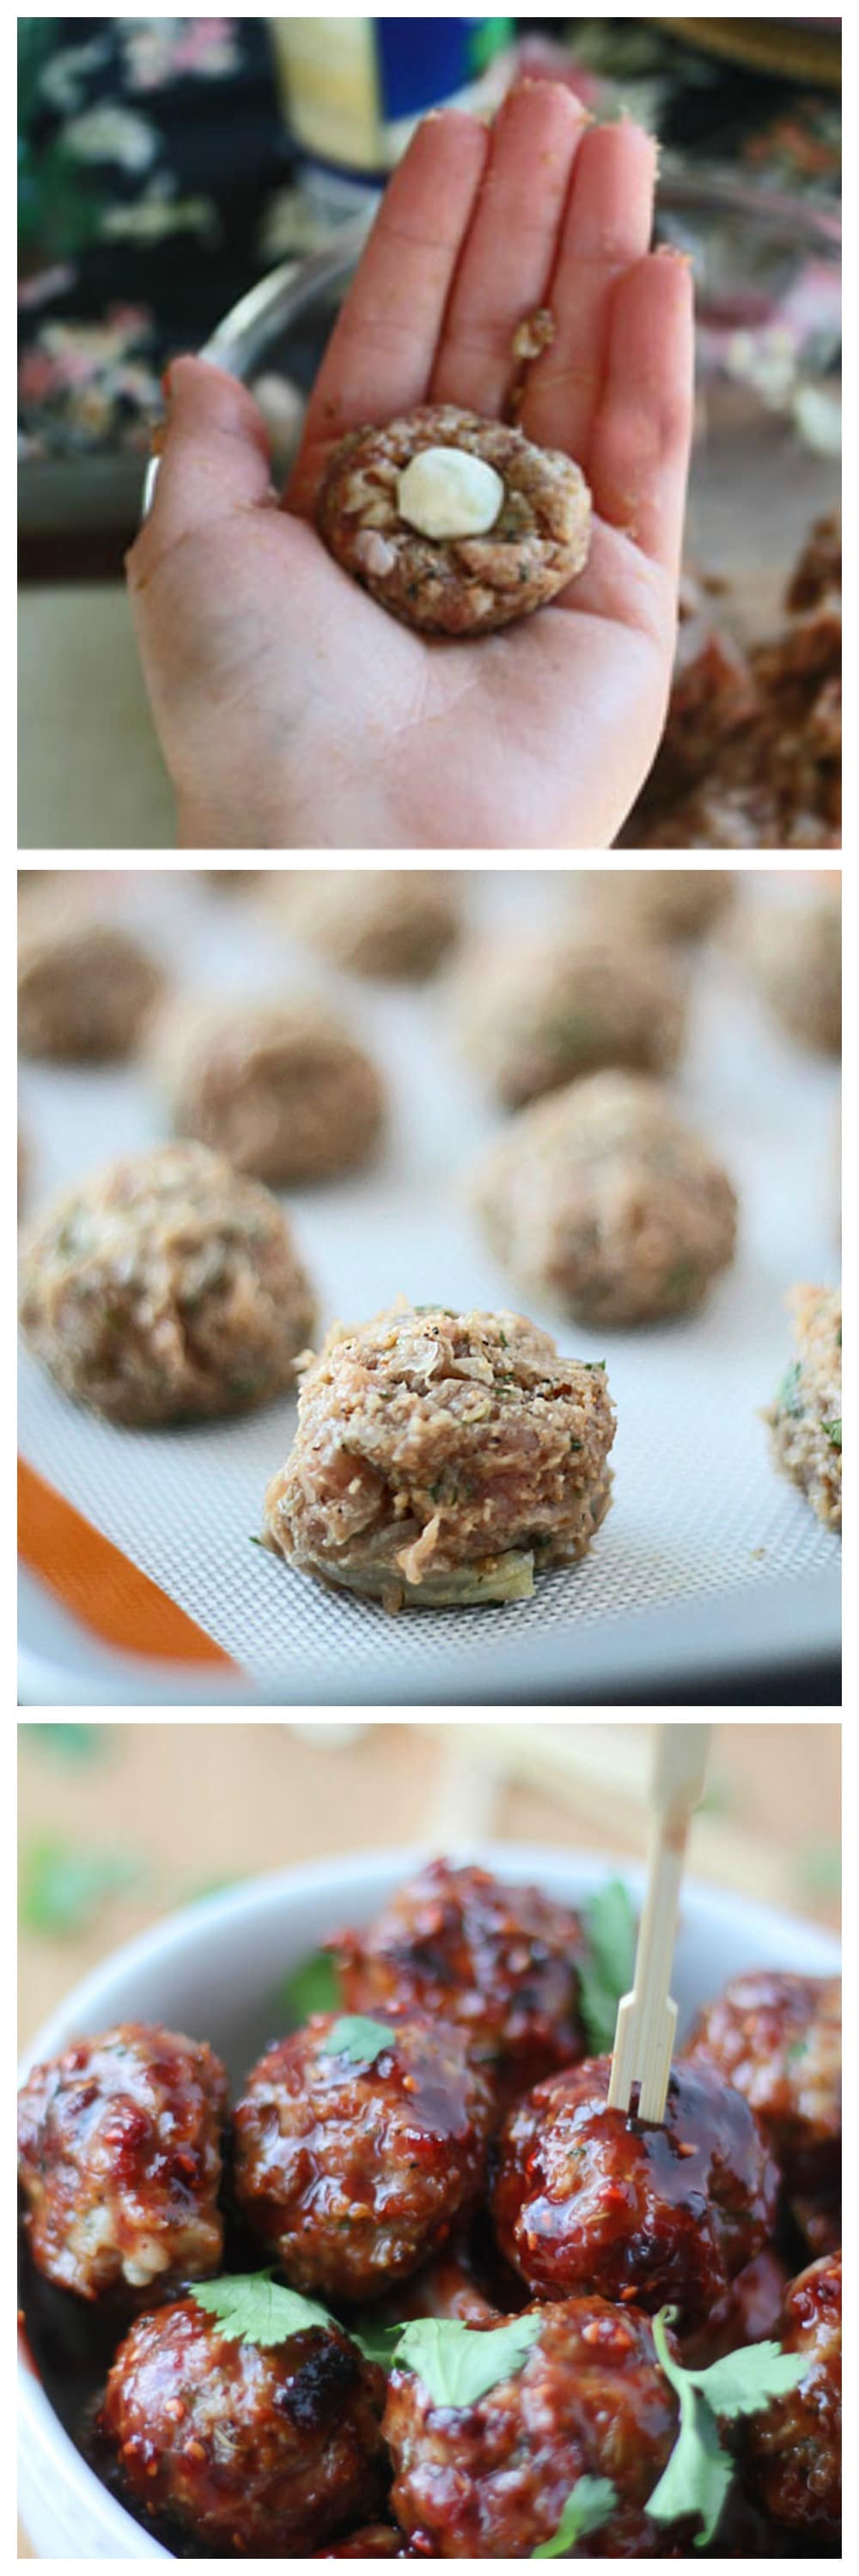 Blue Cheese Stuffed Turkey Meatballs with Raspberry Glaze - A super easy, healthy app that's a total crowd pleaser!